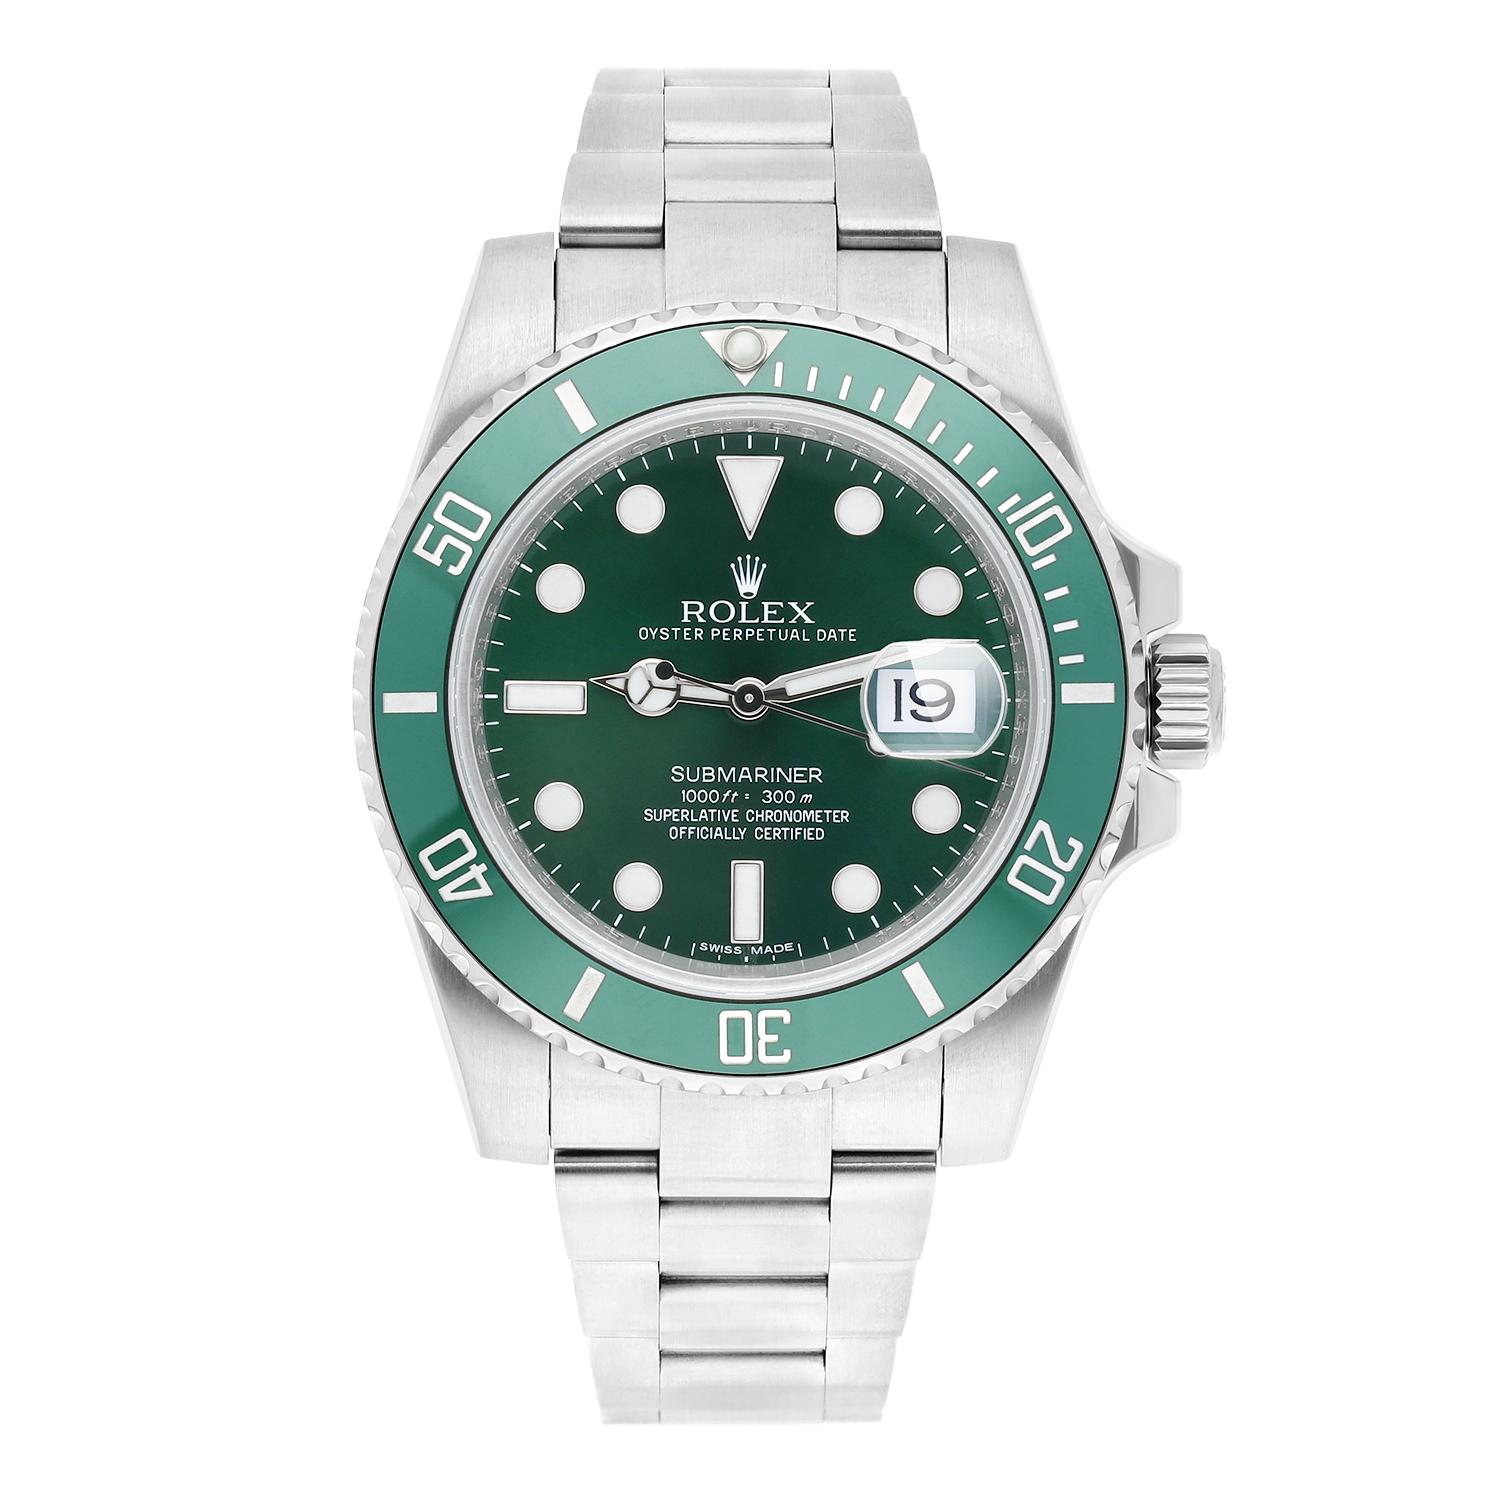 Dive into luxury with the Rolex Submariner 40mm Date 116610LV HULK – a stunning timepiece that effortlessly blends style and precision. This iconic watch features a vibrant green ceramic bezel and matching dial, exuding sophistication. Complete with